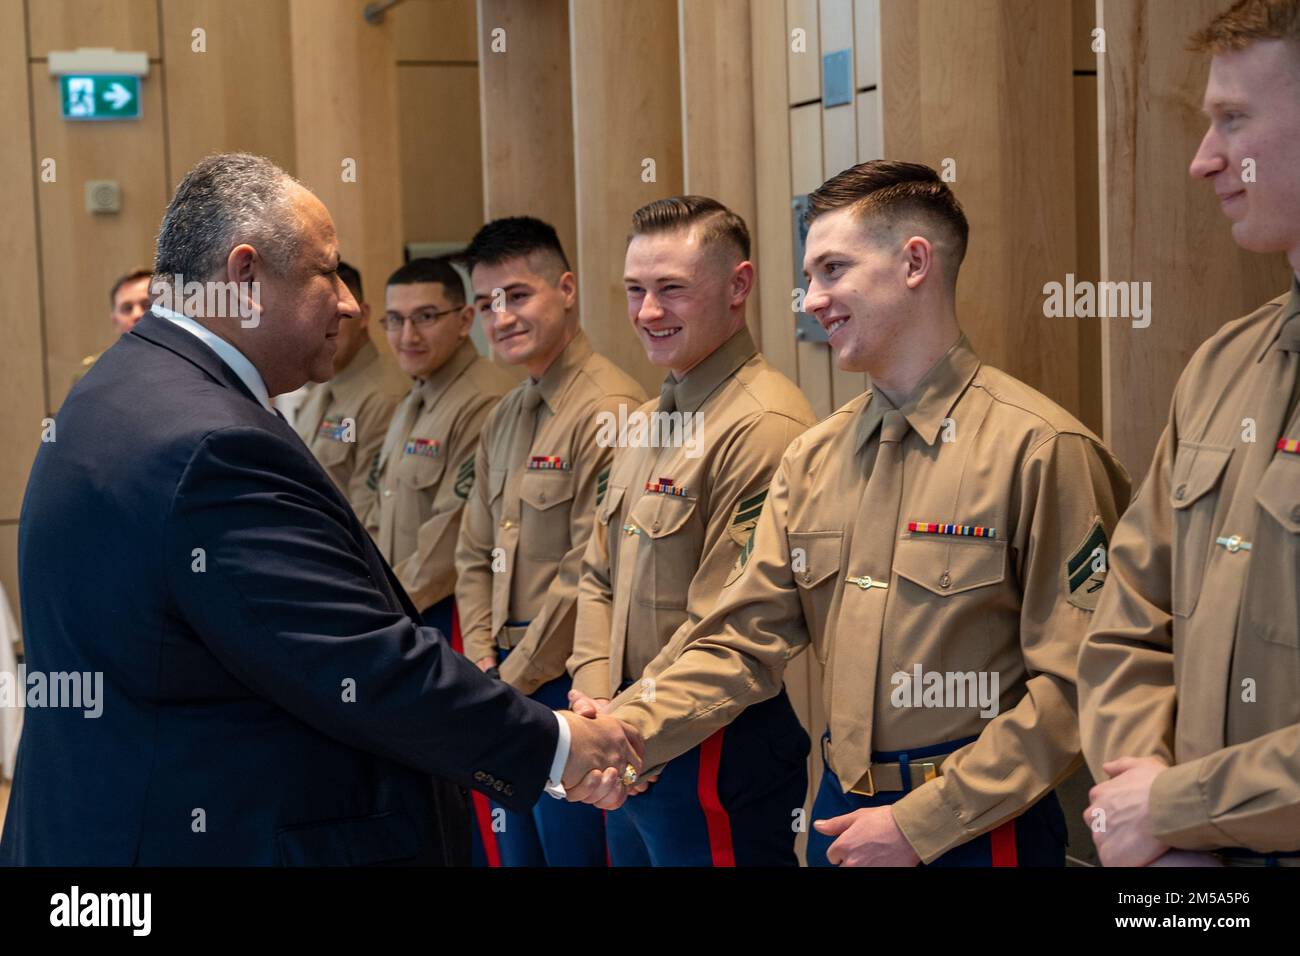 OSLO, Norway (Feb. 14, 2022) — Secretary of the Navy Carlos Del Toro greets U.S. Marines assigned to Marine Security Guard, Detachment Oslo in Oslo, Norway, Feb. 14, 2022. Secretary Del Toro is in Norway to visit U.S. service members and Norwegian government leaders to reinforce existing bilateral and multilateral security relationships between the U.S. Navy and the Royal Norwegian Navy. Stock Photo